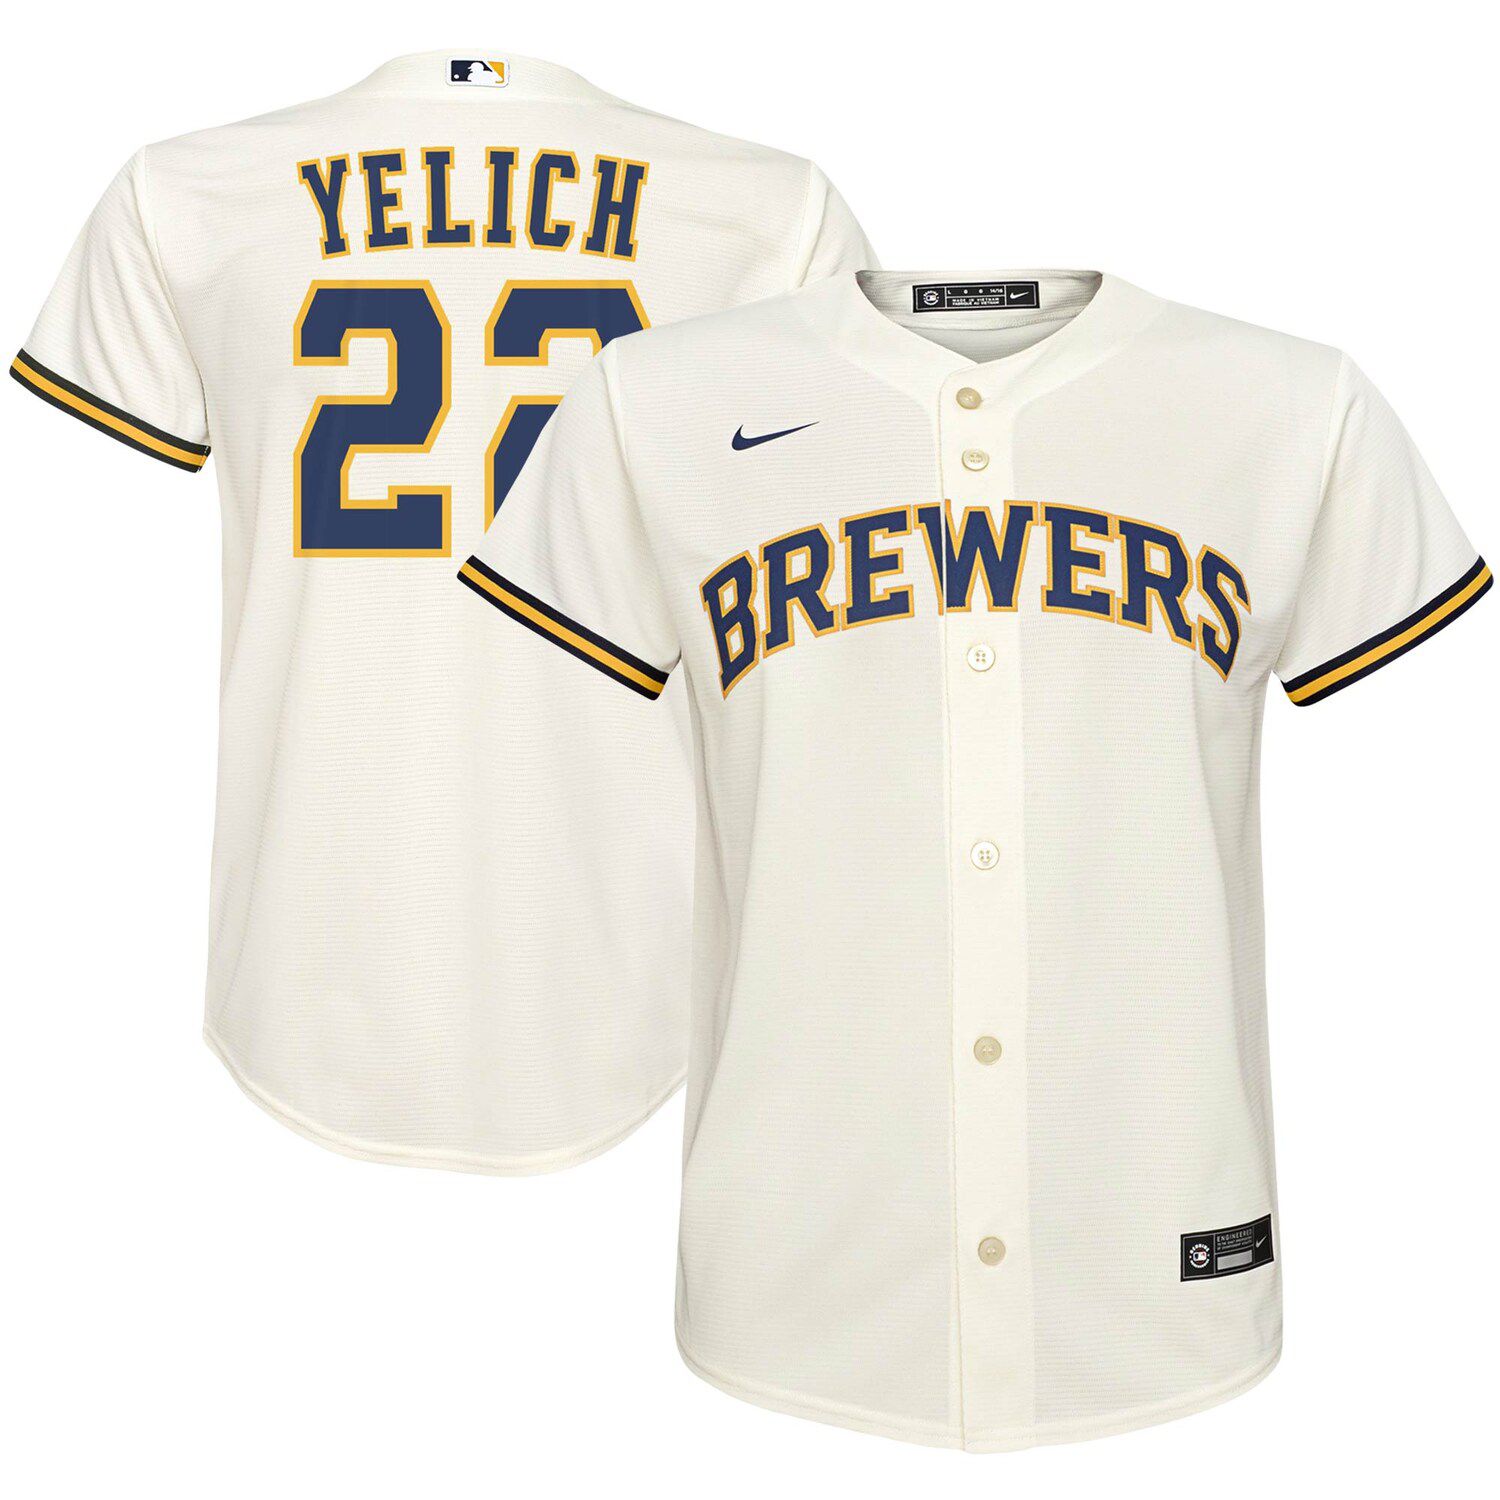 yelich youth jersey